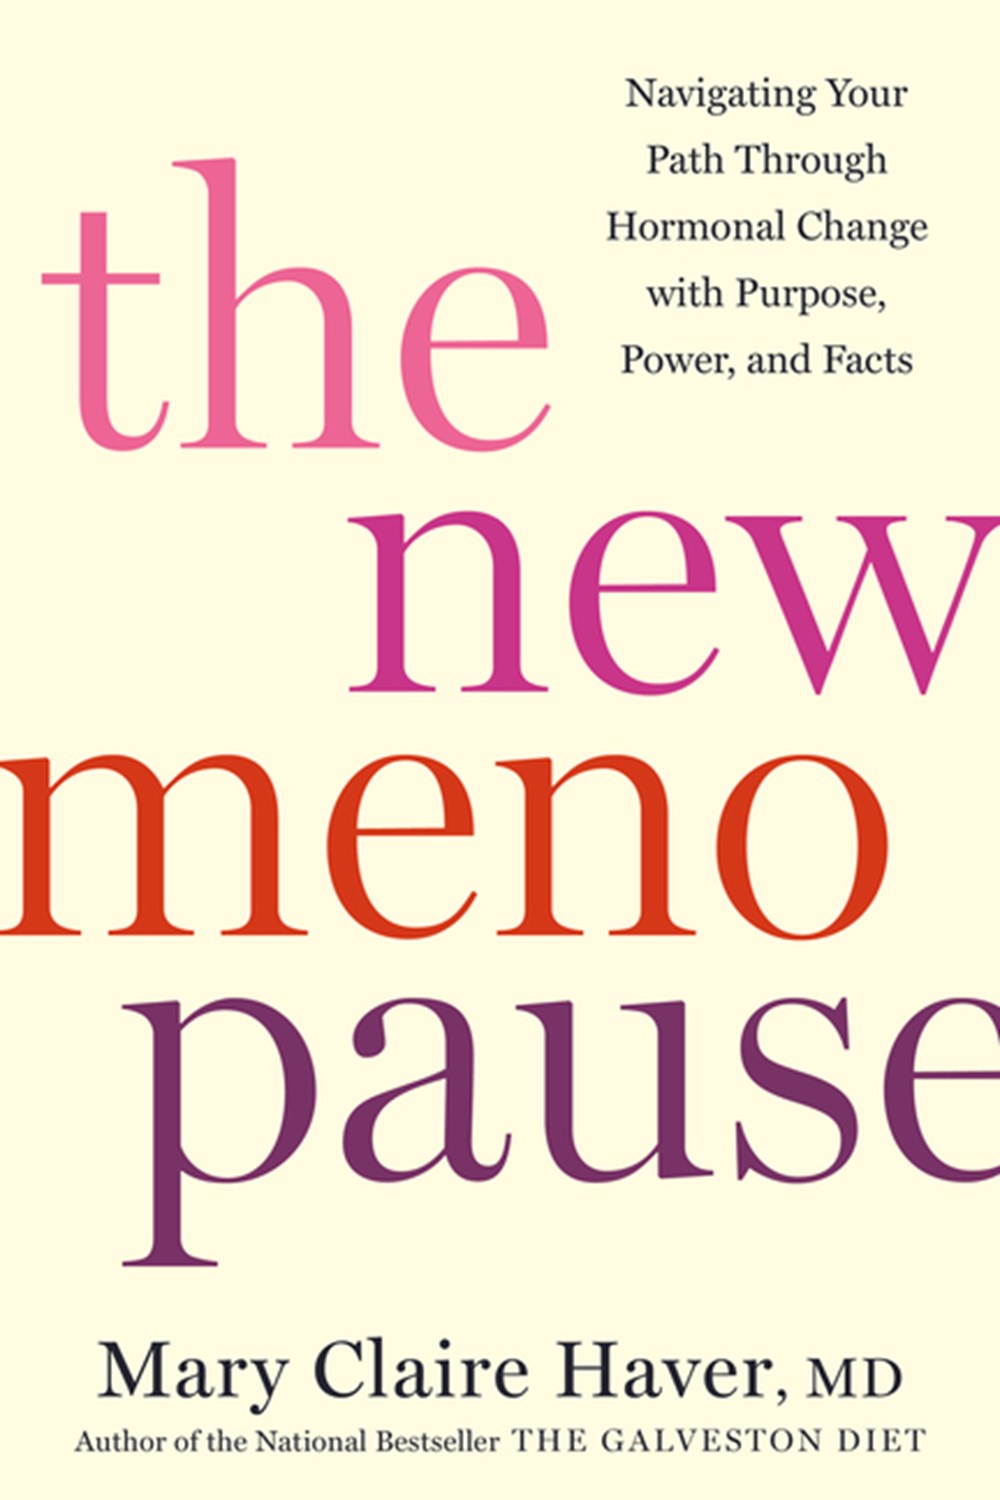 New Menopause: Navigating Your Path Through Hormonal Change with Purpose, Power, and Facts